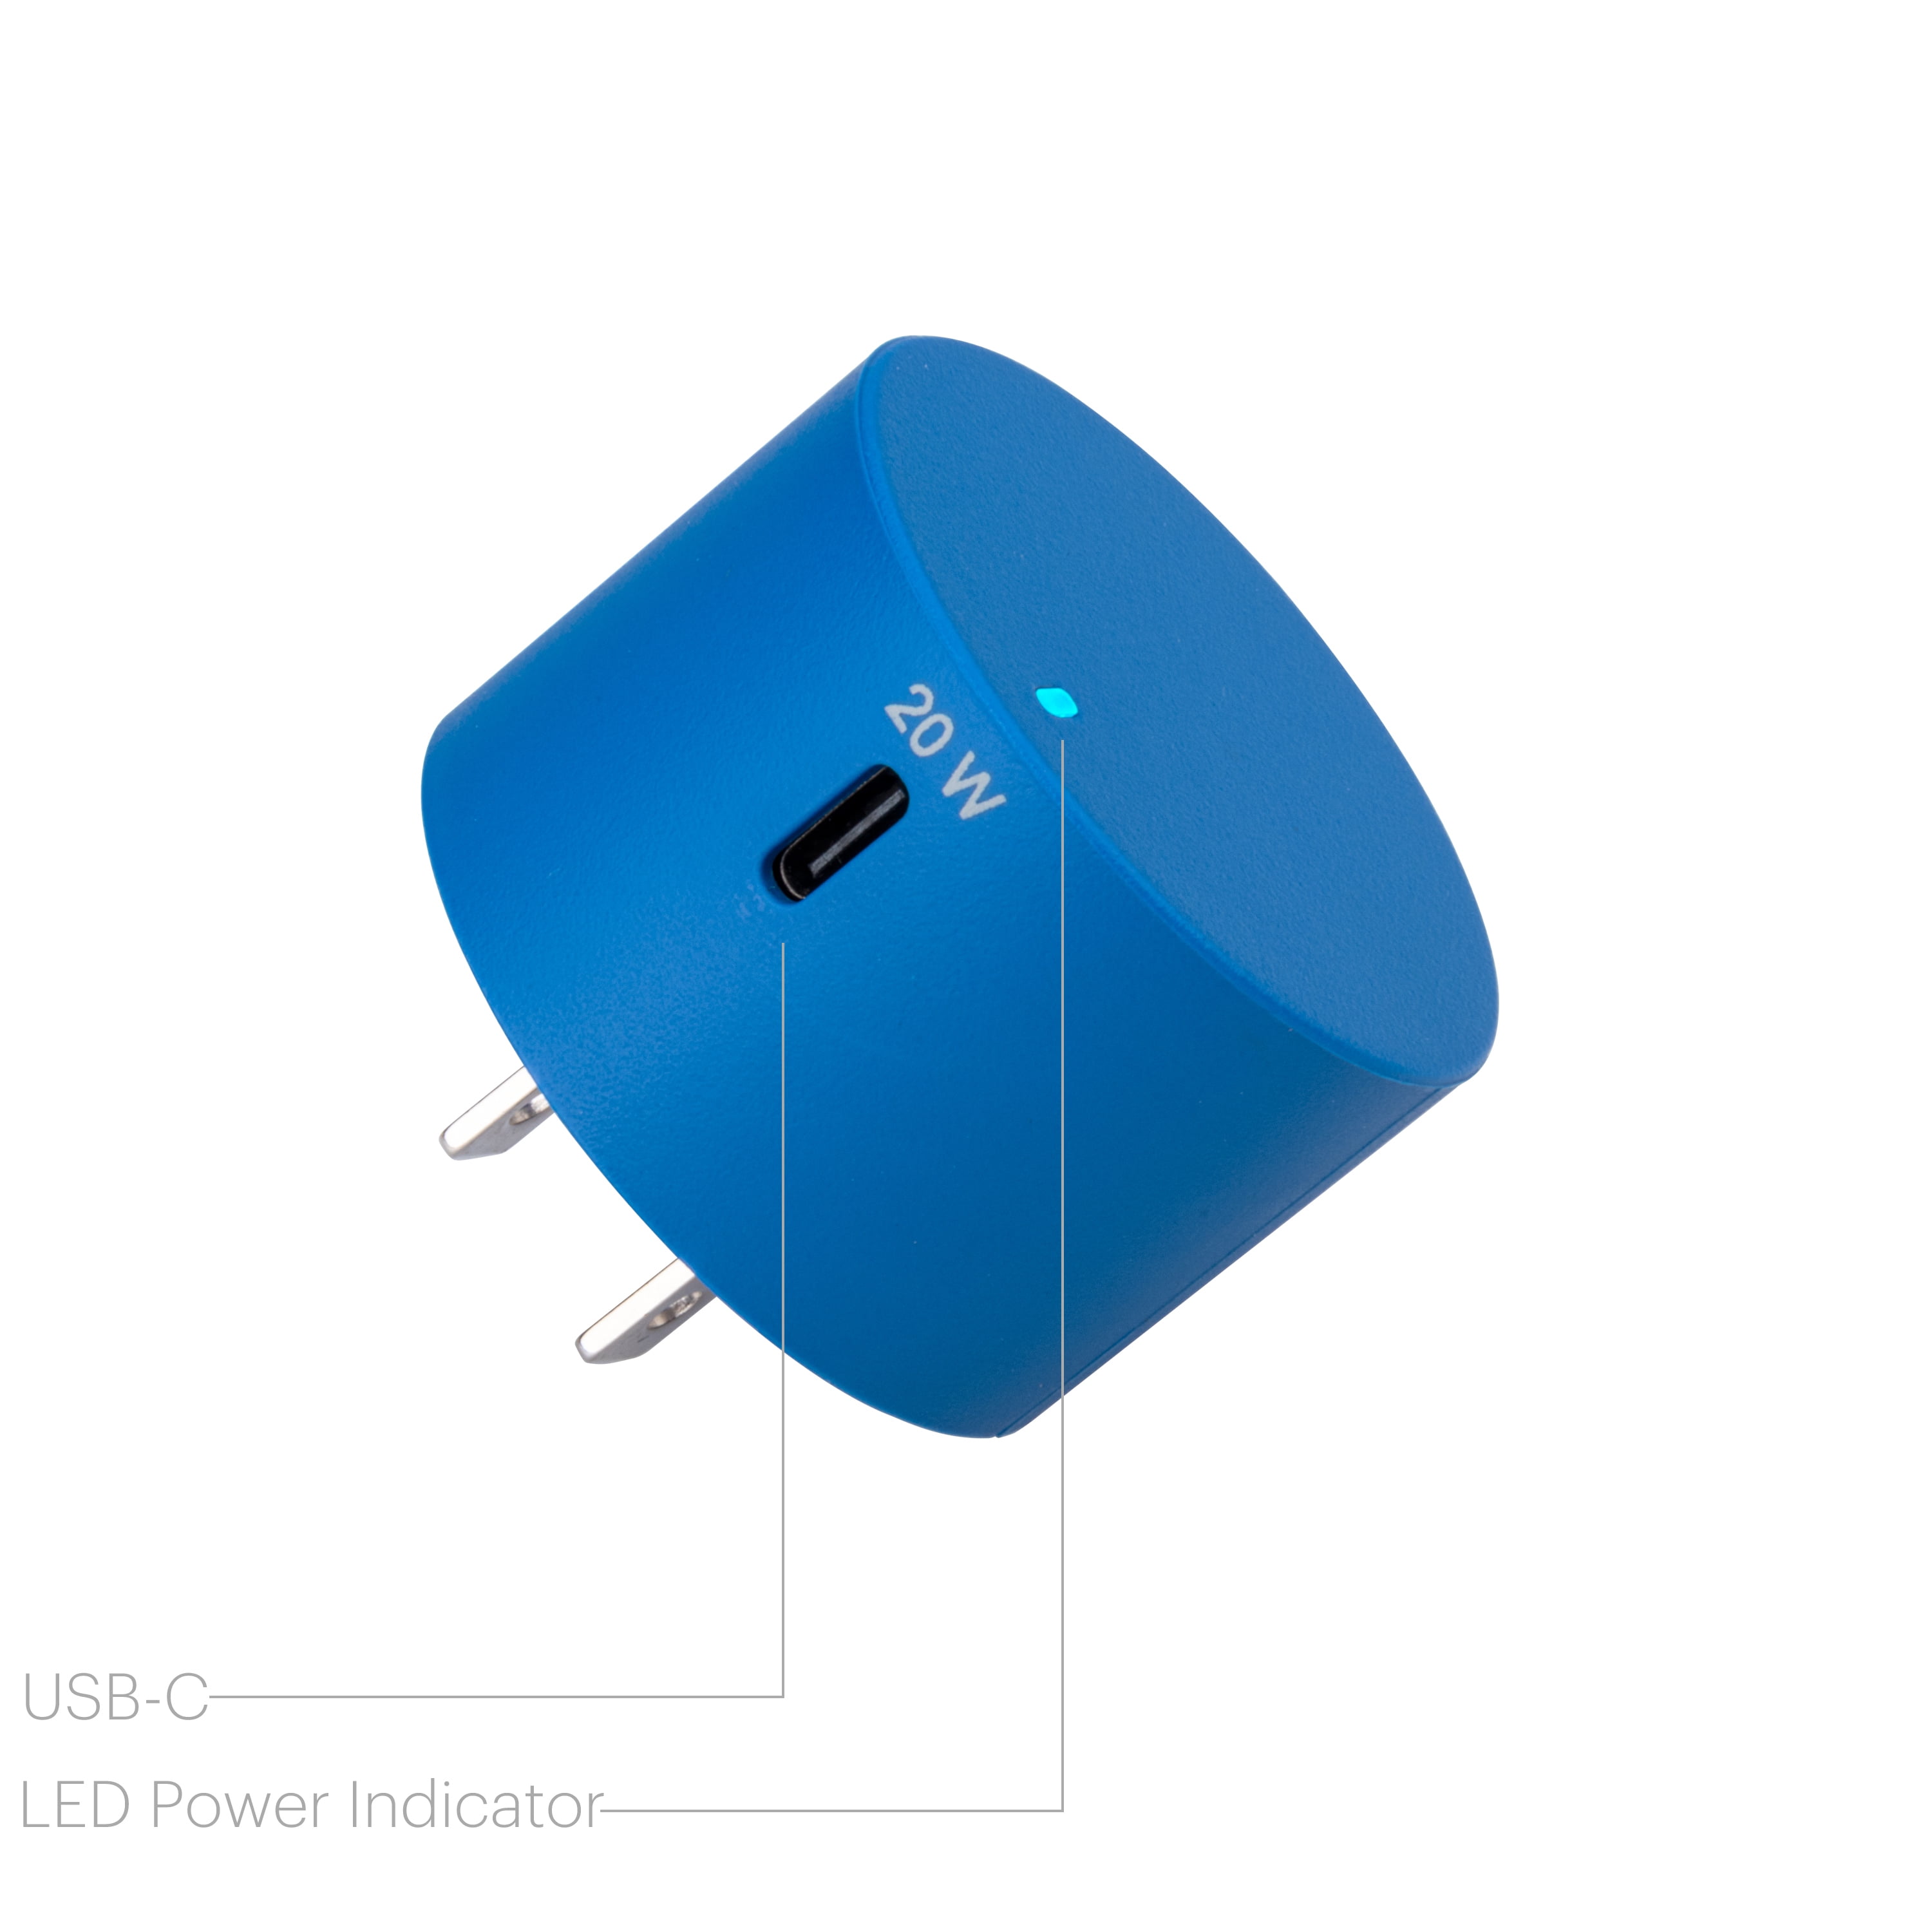 onn. 20W USB-C Wall Charger with Power Delivery, Blue, for iPhone models (13/12/11/SE/XS/XR/8 series), Samsung, Sony, and LG smartphone models, foldable plug for on the go.